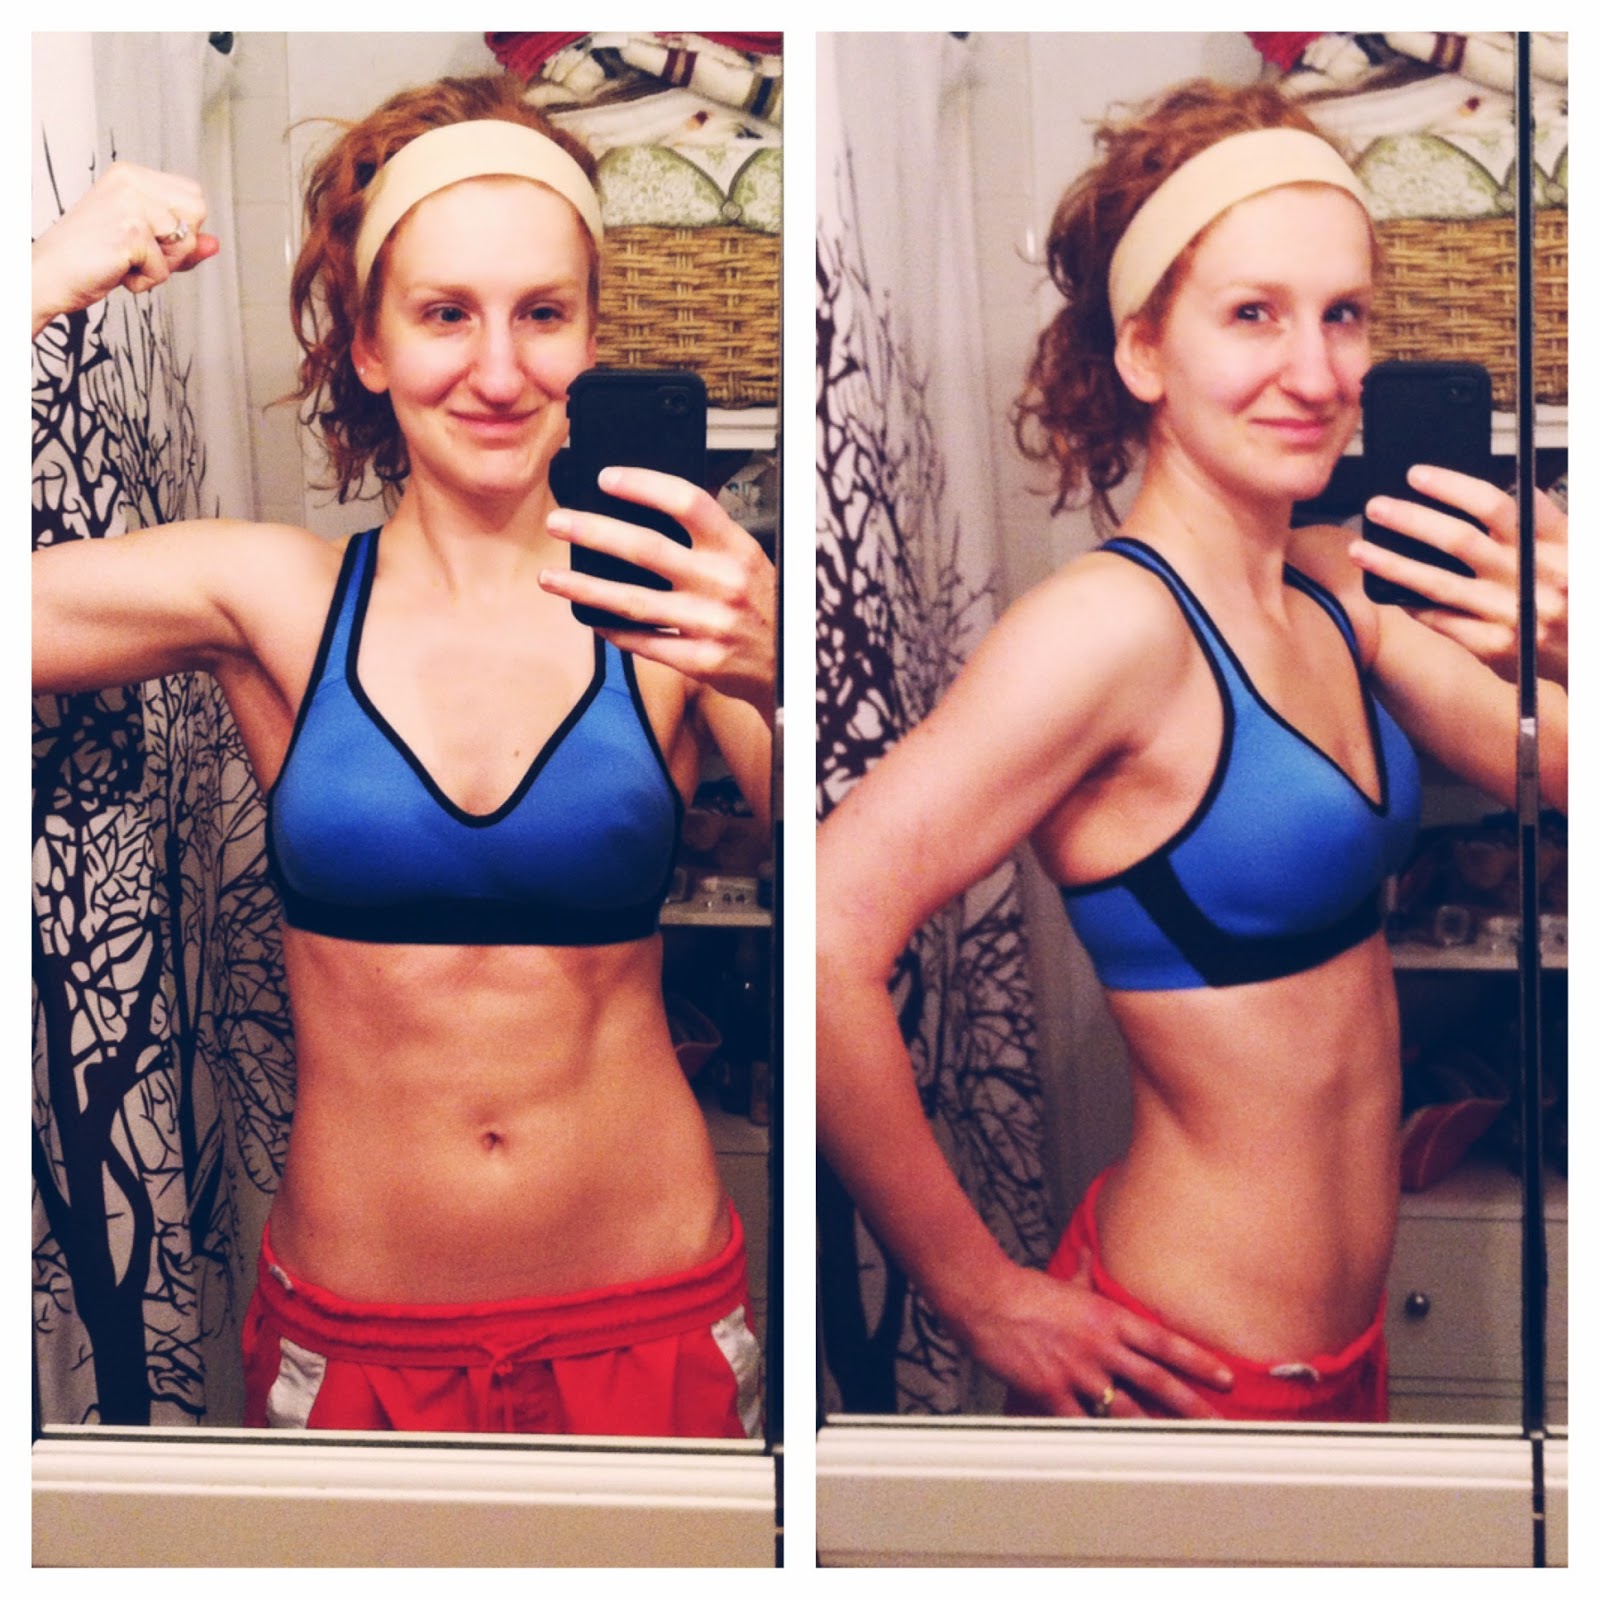 21 Day Fix Results Week 2